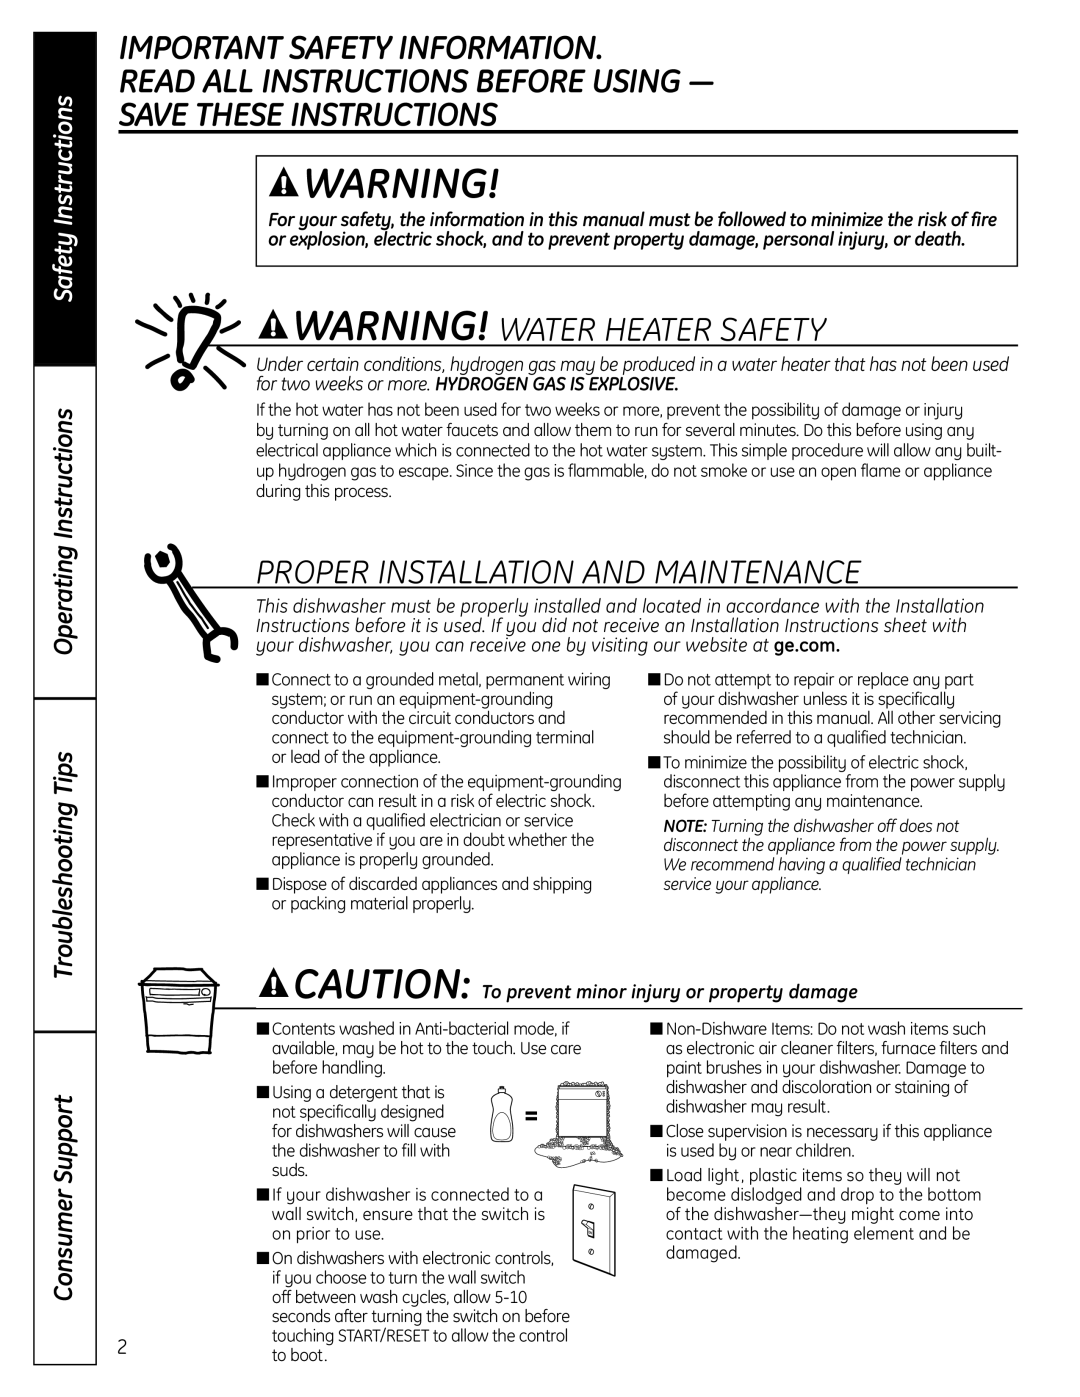 GE GSD6900 Important Safety Information, Read All Instructions Before Using, Save These Instructions, Safety Instructions 